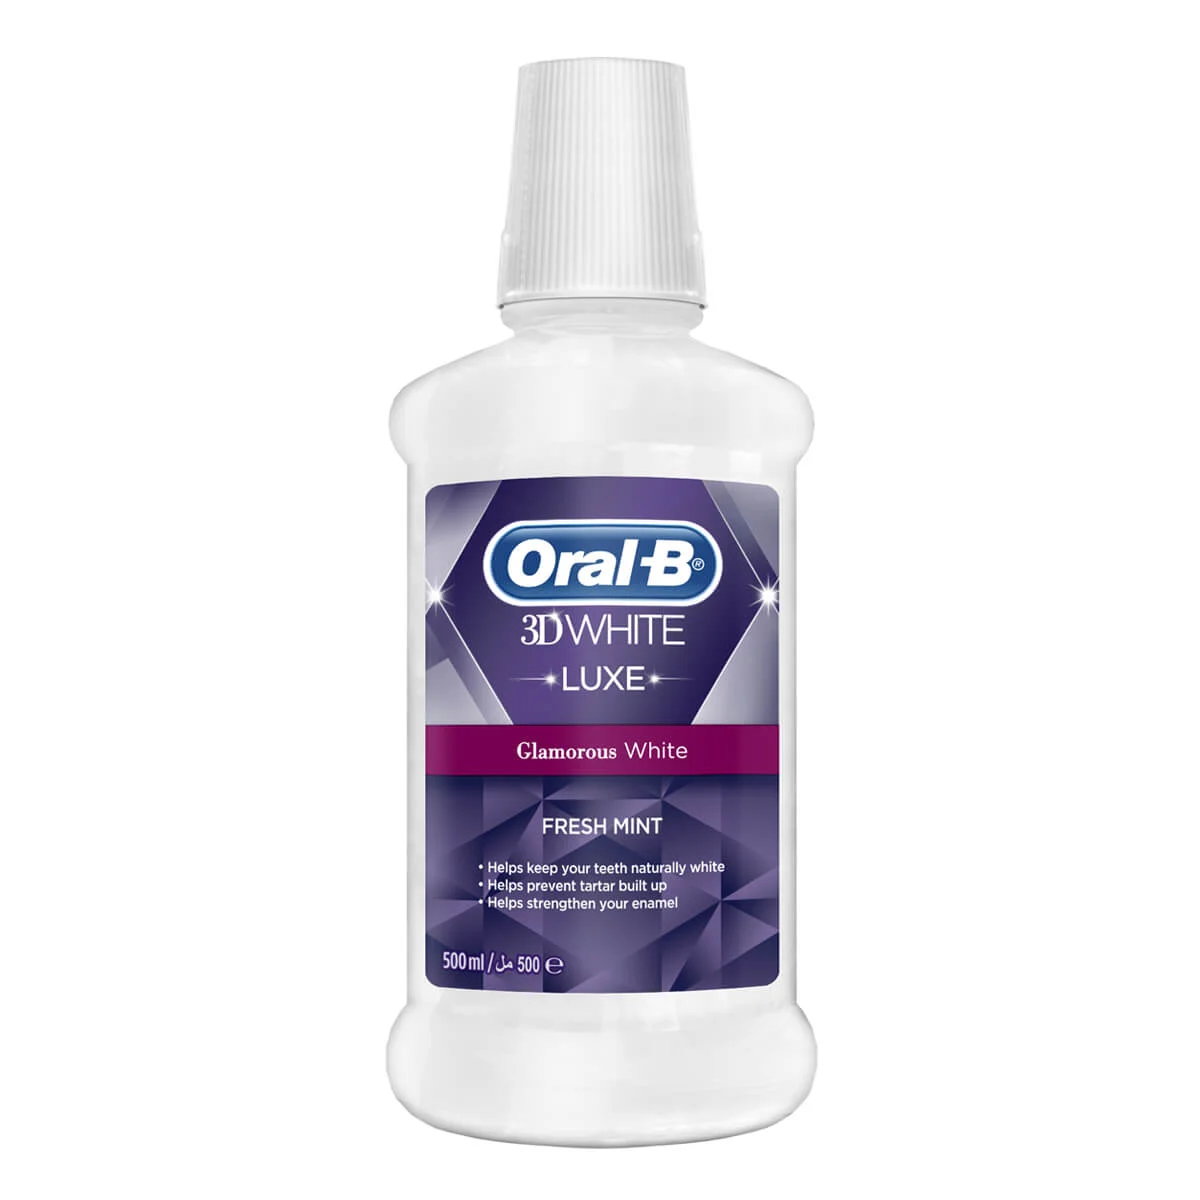 Oral-B 3D White Luxe Mouthwash 